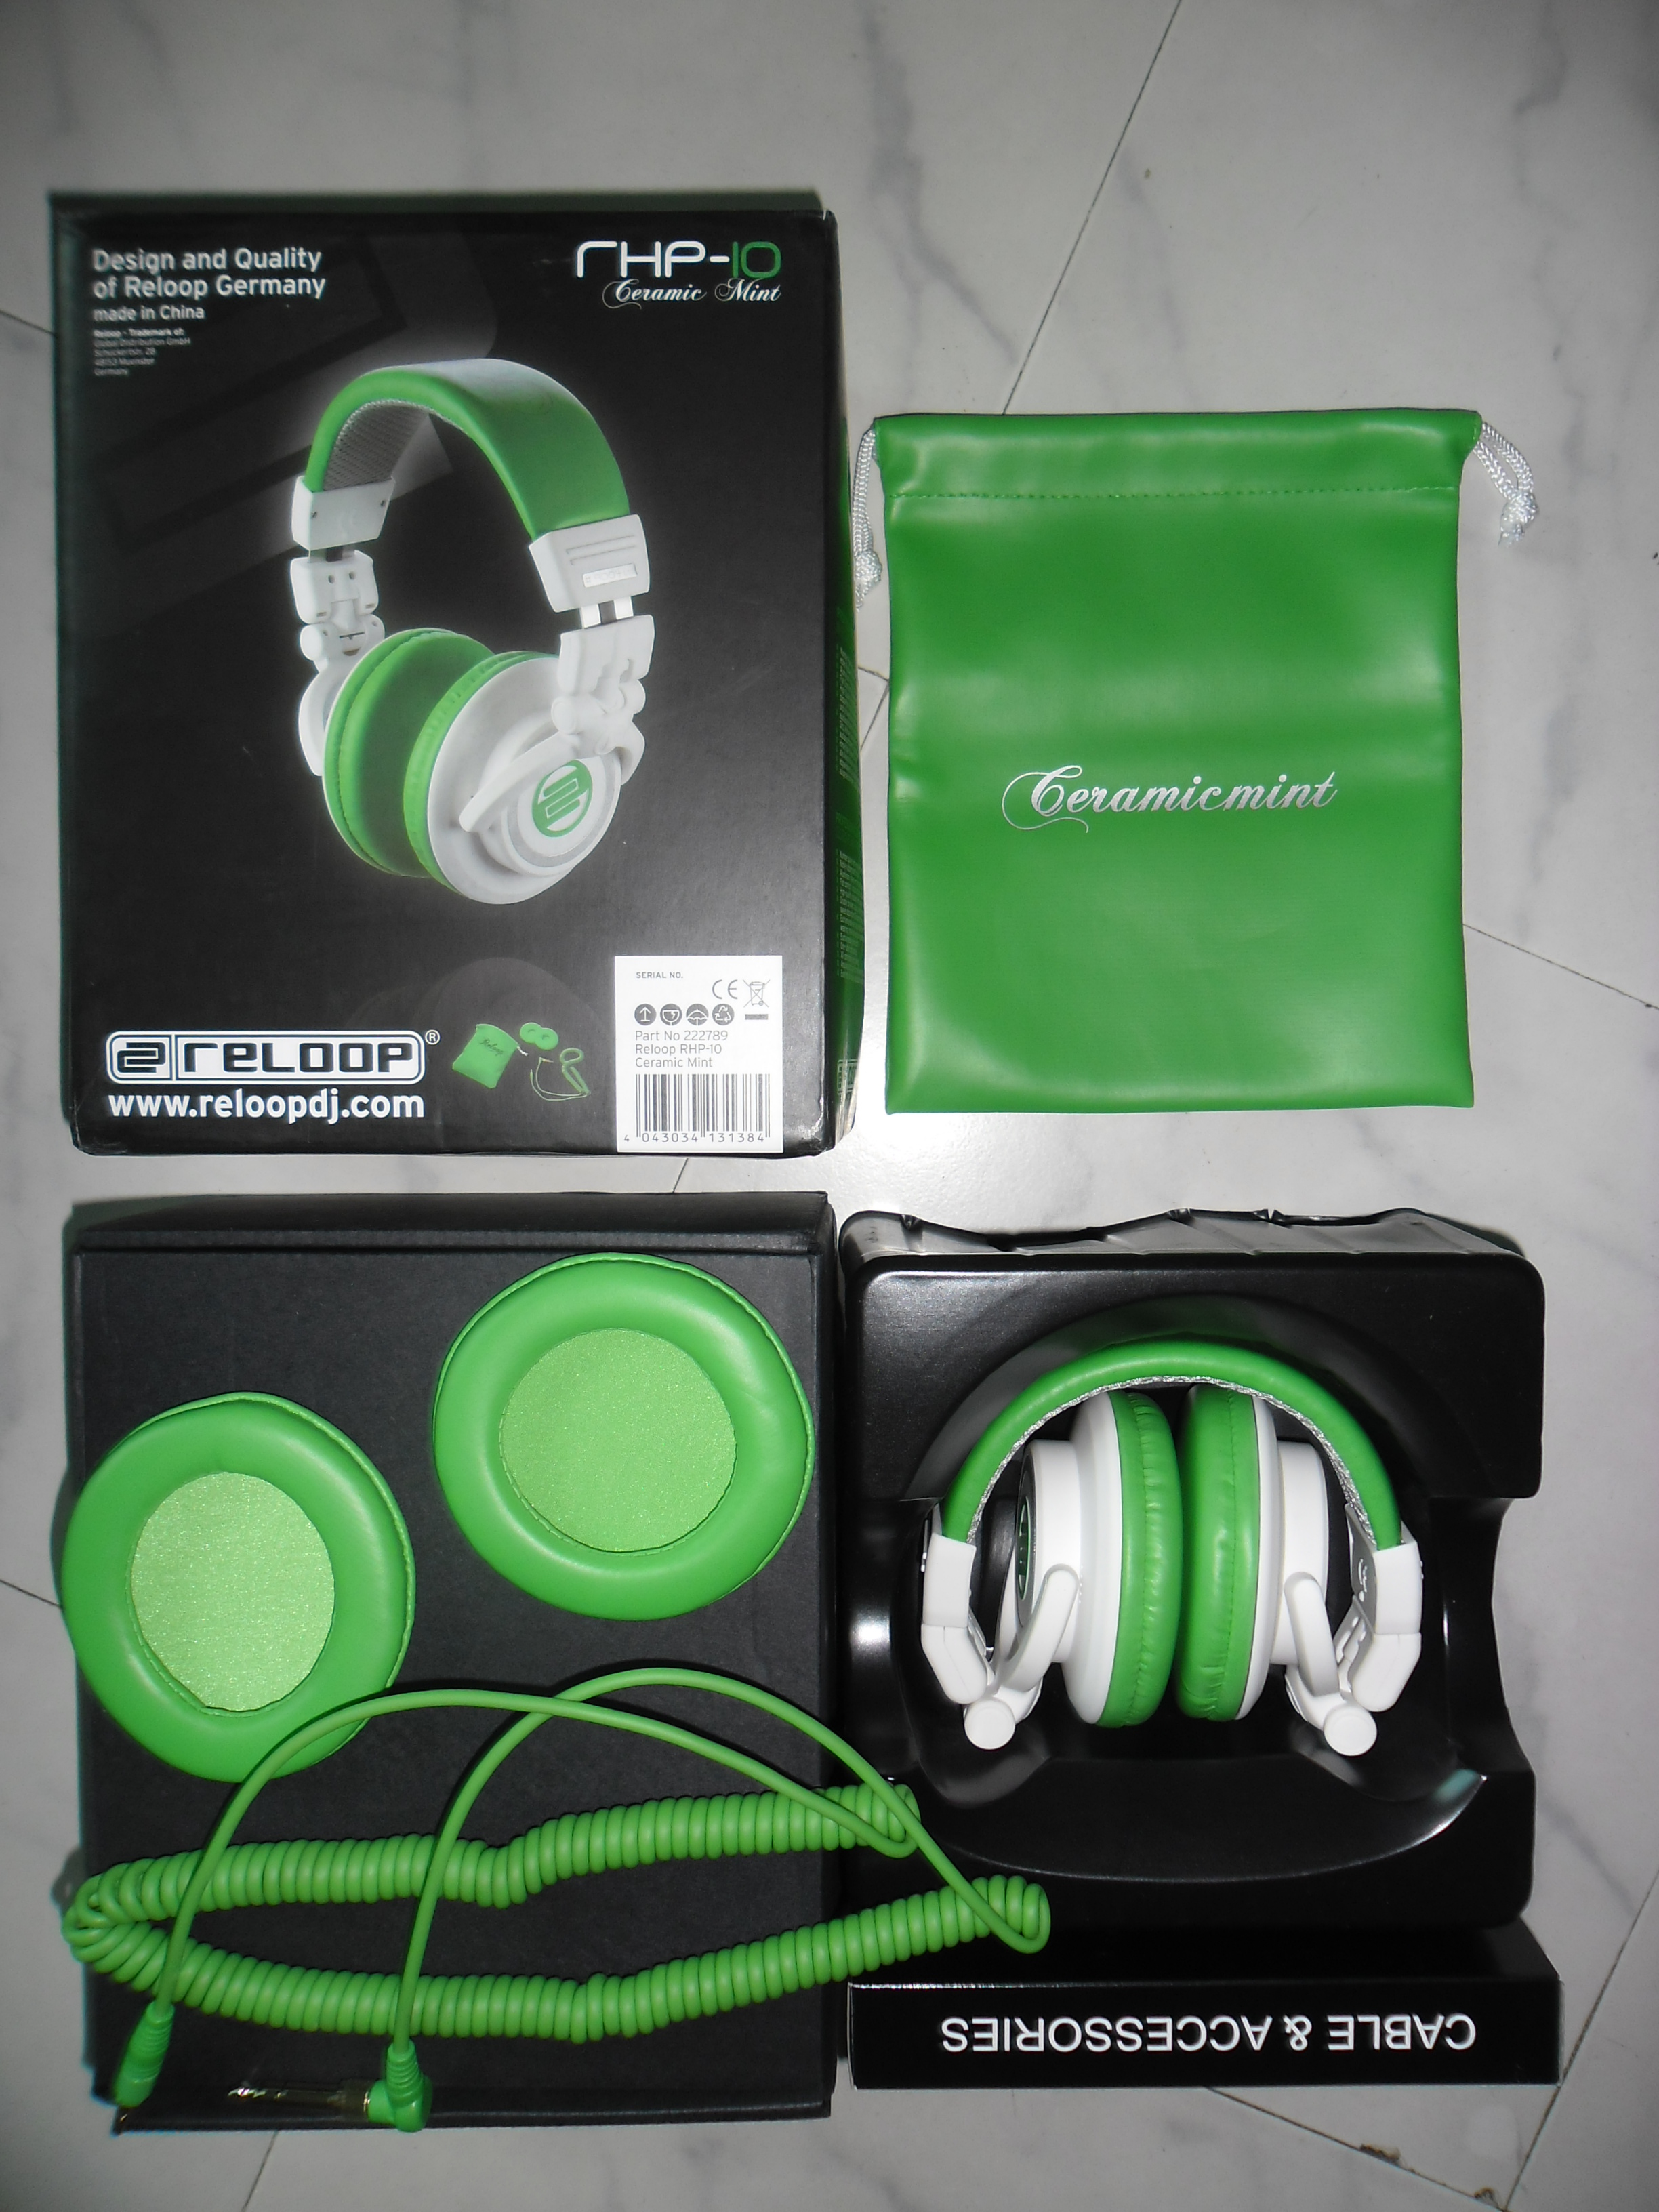 Dj Headphone - Reloop RHP-10 Limited Special Editions  large image 0